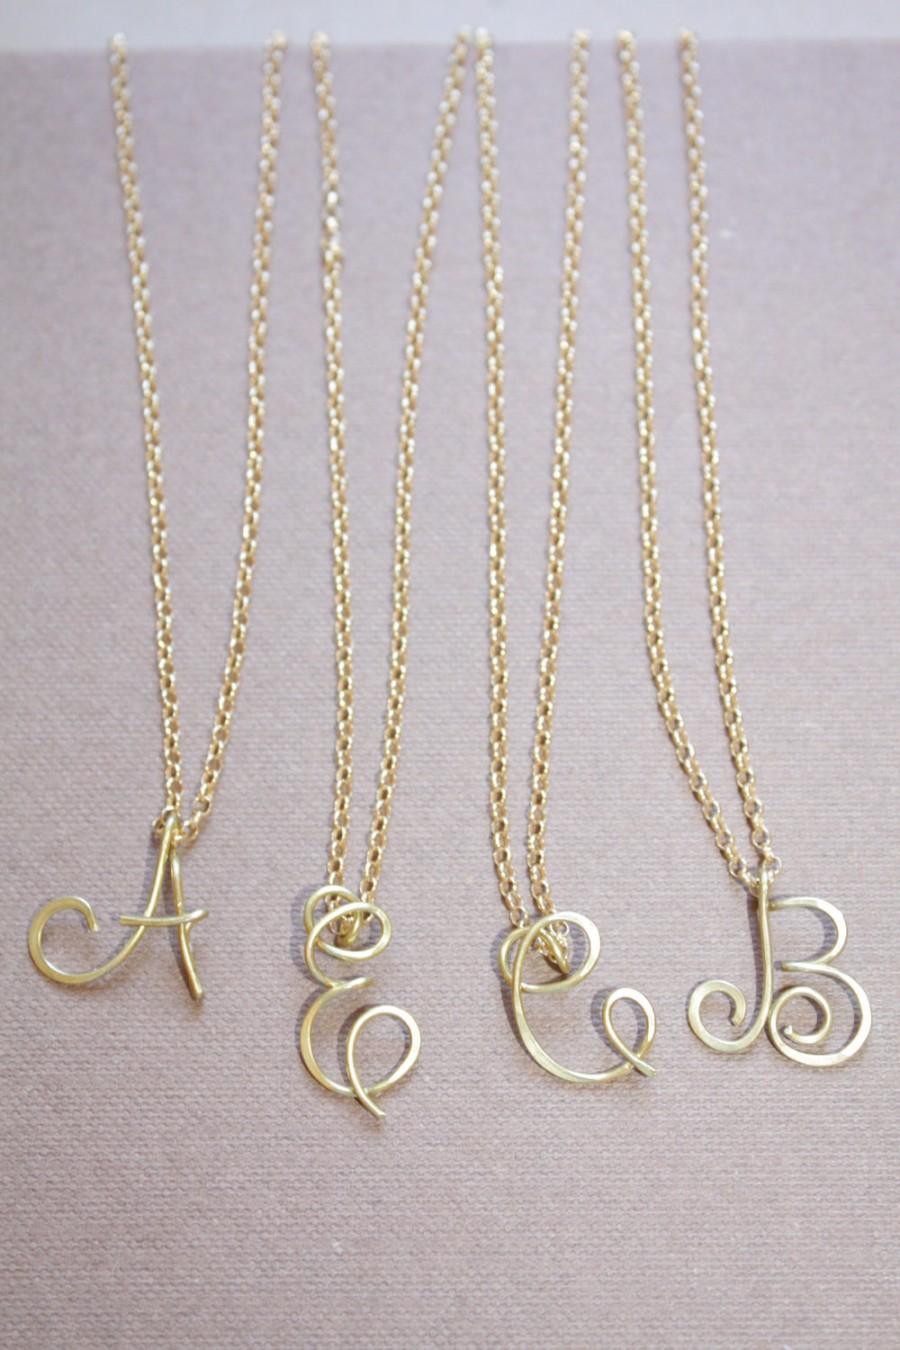 Hochzeit - Uppercase Initial Letter Necklace Personalized Cursive Letter Necklace Gold Letter Necklace Silver Initial Necklace Cursive Letter Di&De